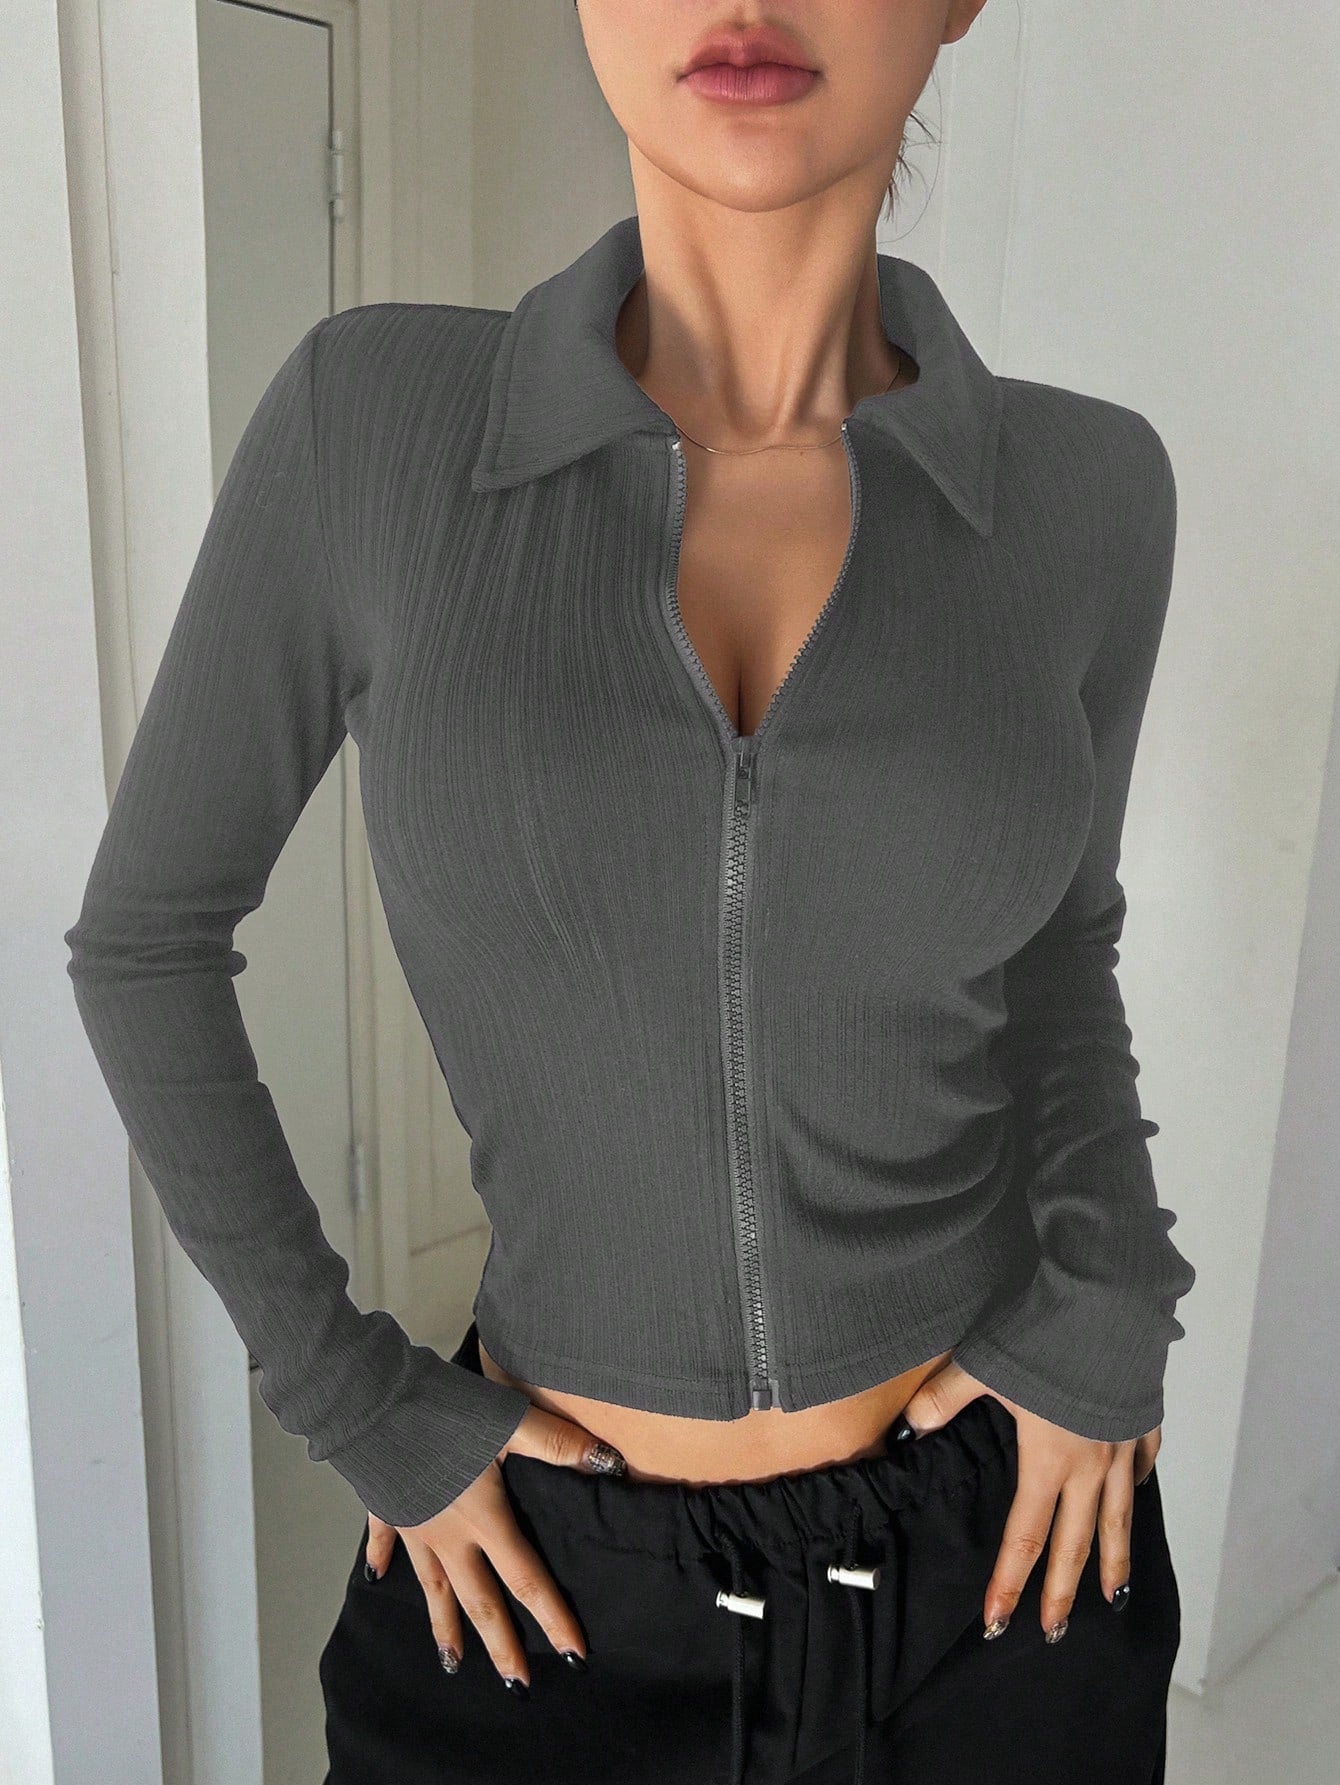 Women's Plain Color Slim Fit, Short Cut Long Sleeve T-Shirt With Front Zipper And Collar